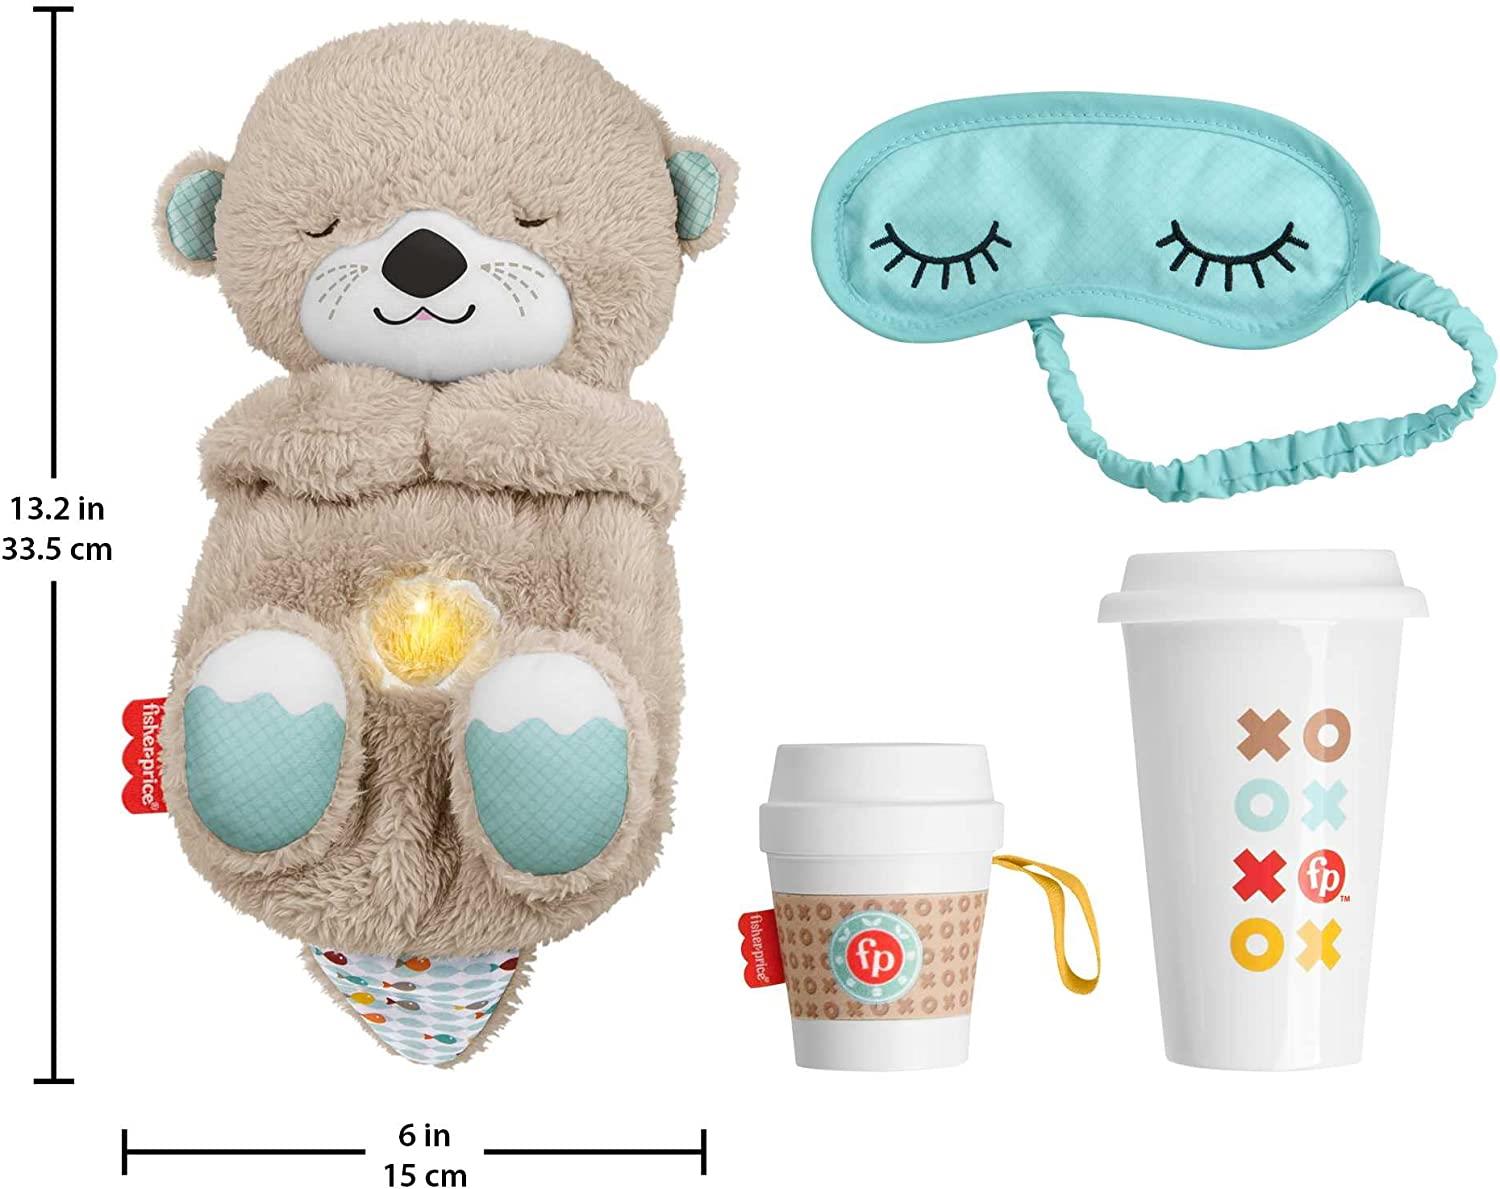 Fisher-Price Soothe, Play & Sip Gift Set for Newborn Baby by